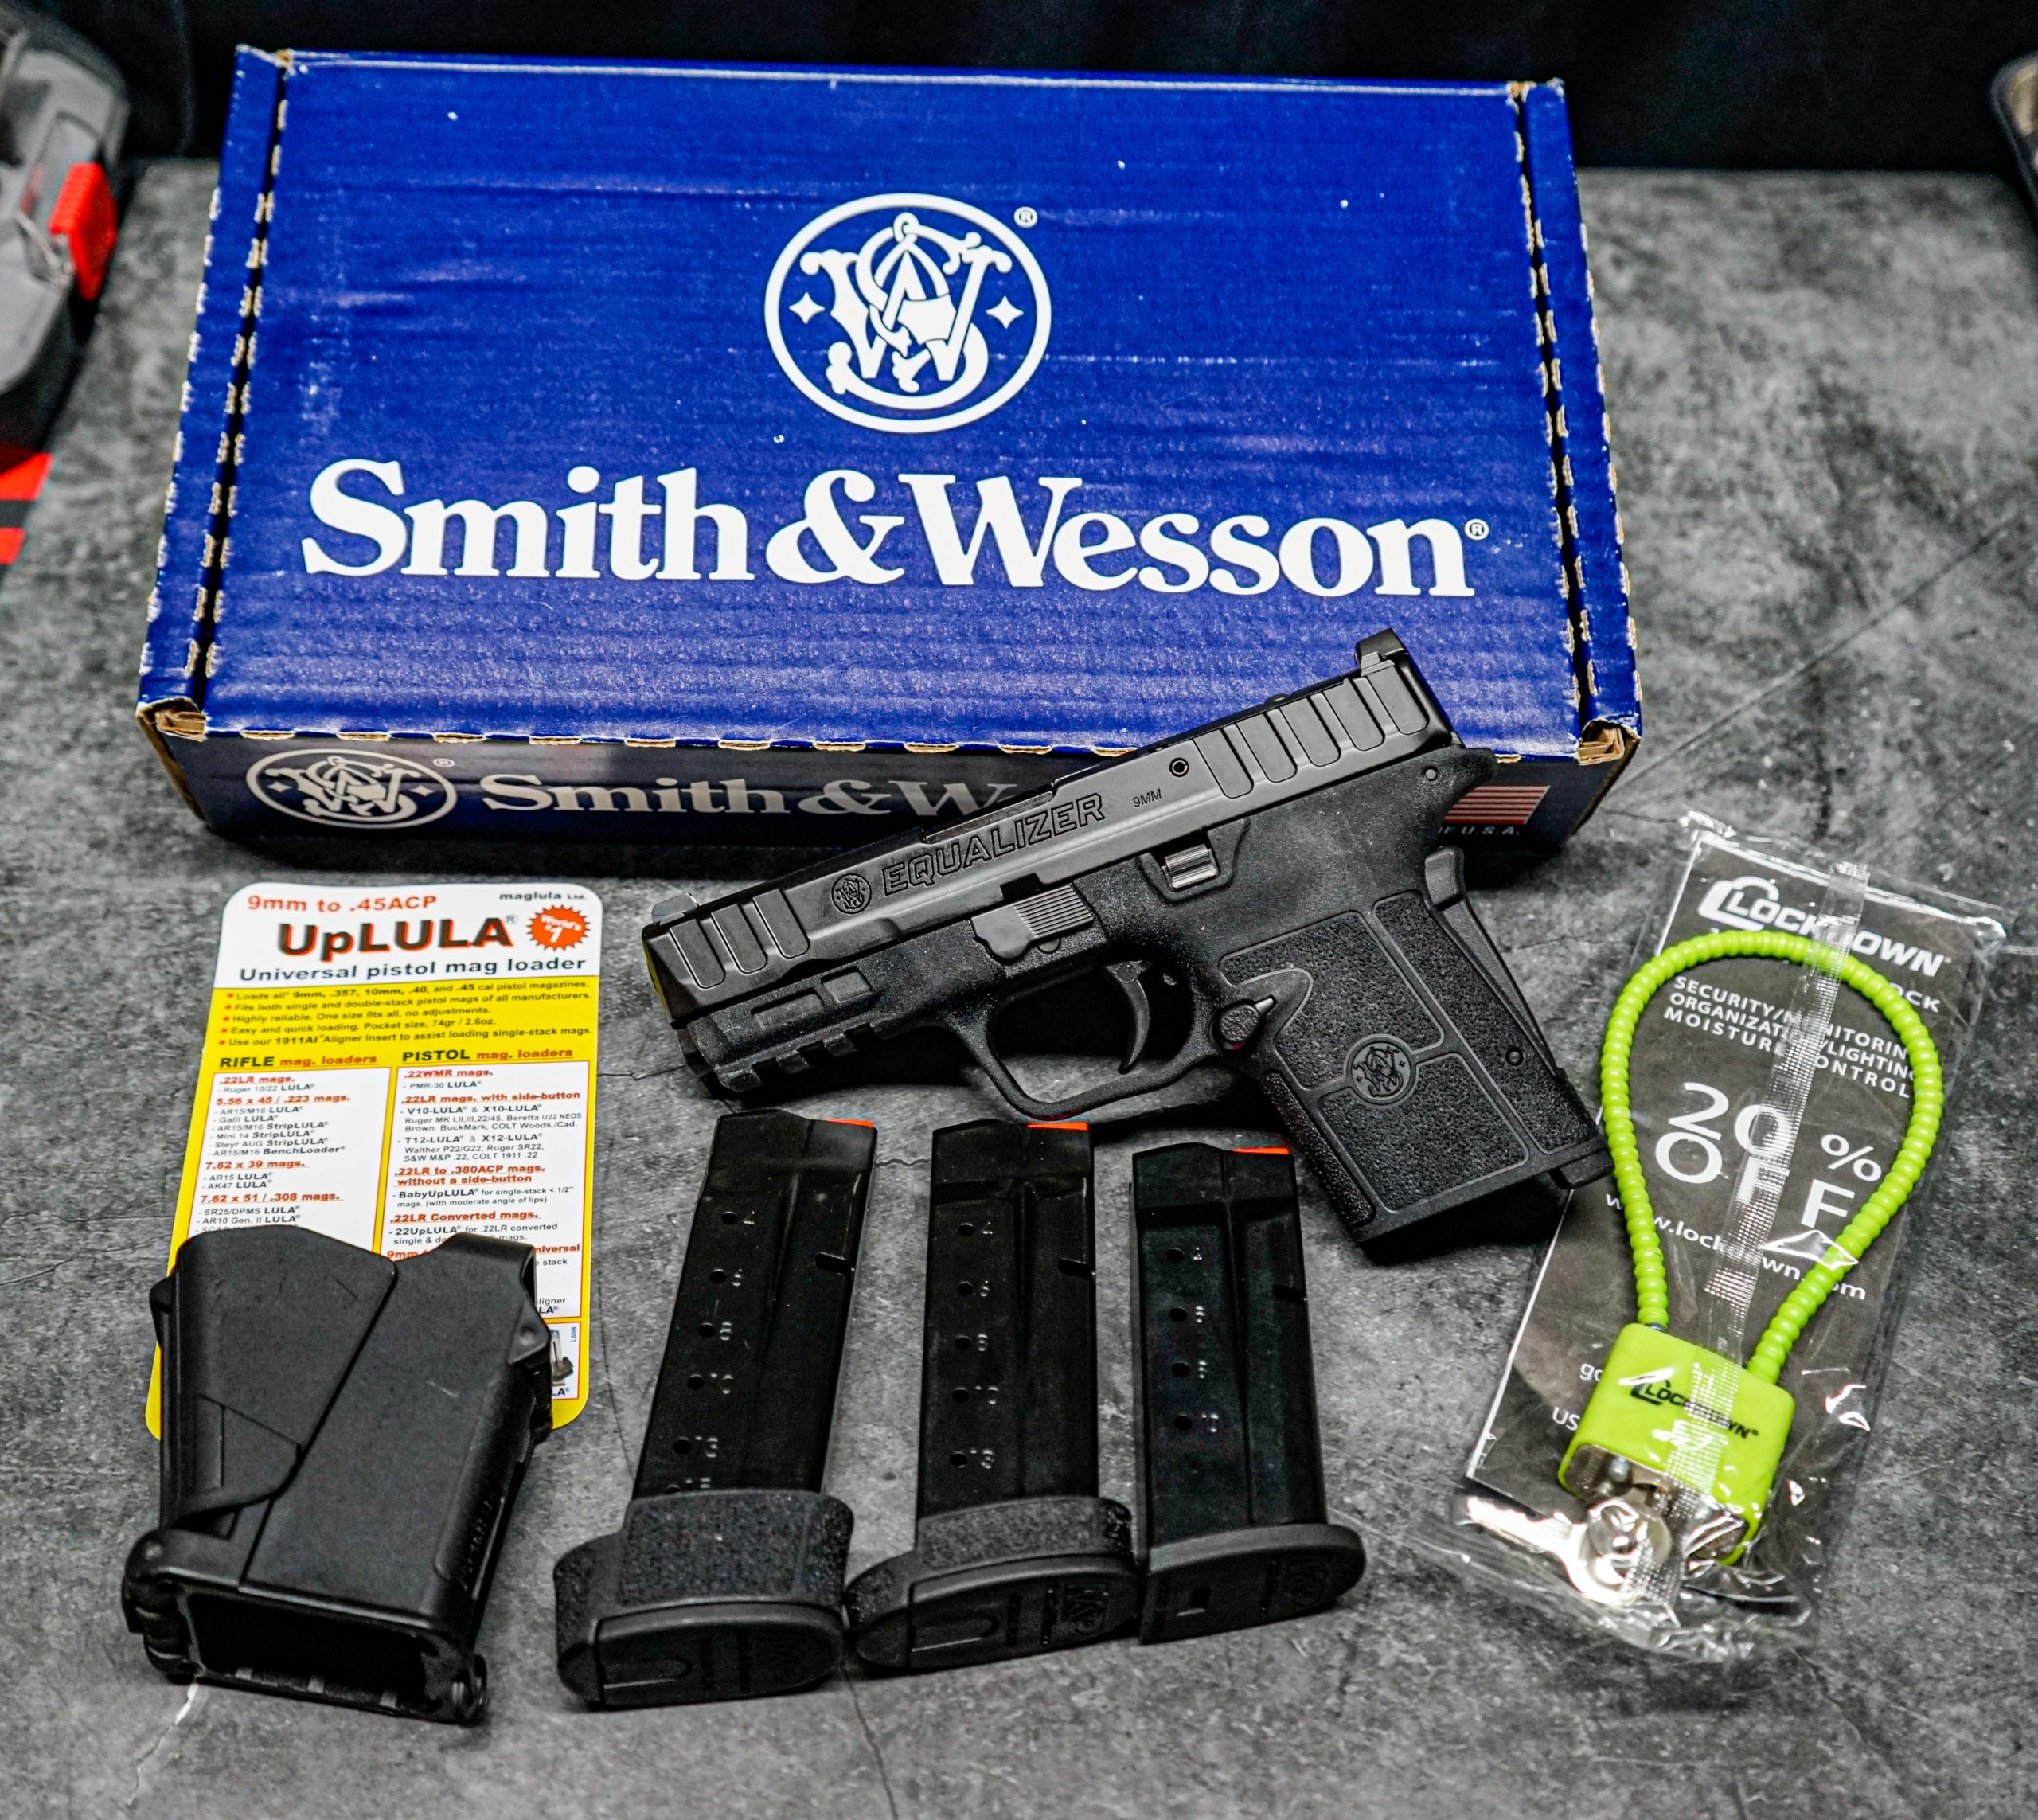 What's in the Smith & Wesson Equalizer box